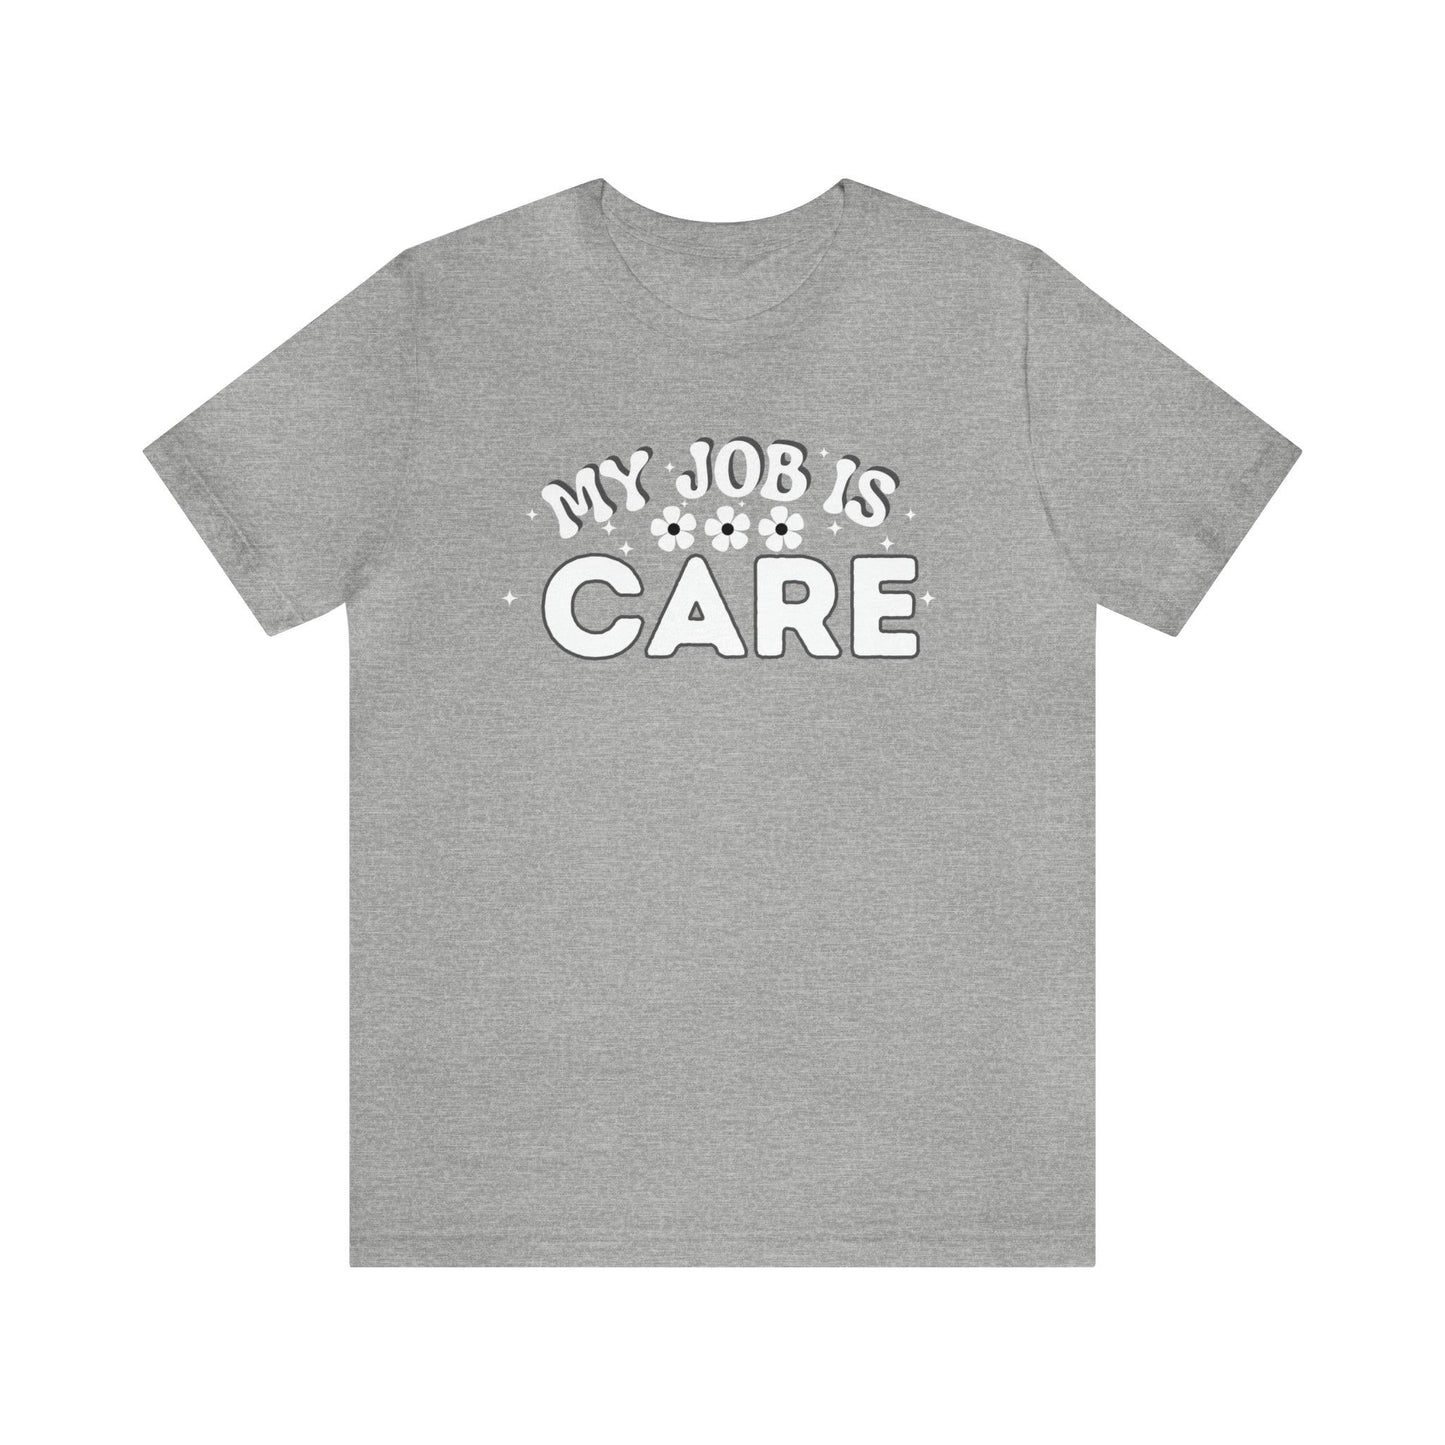 My Job is Care Shirt Doctor, Nurse, Caregiver, Social Worker, Psychologist, Therapist, Paramedic, Childcare provider, Hospice Workers, Animal Caretaker, - Giftsmojo